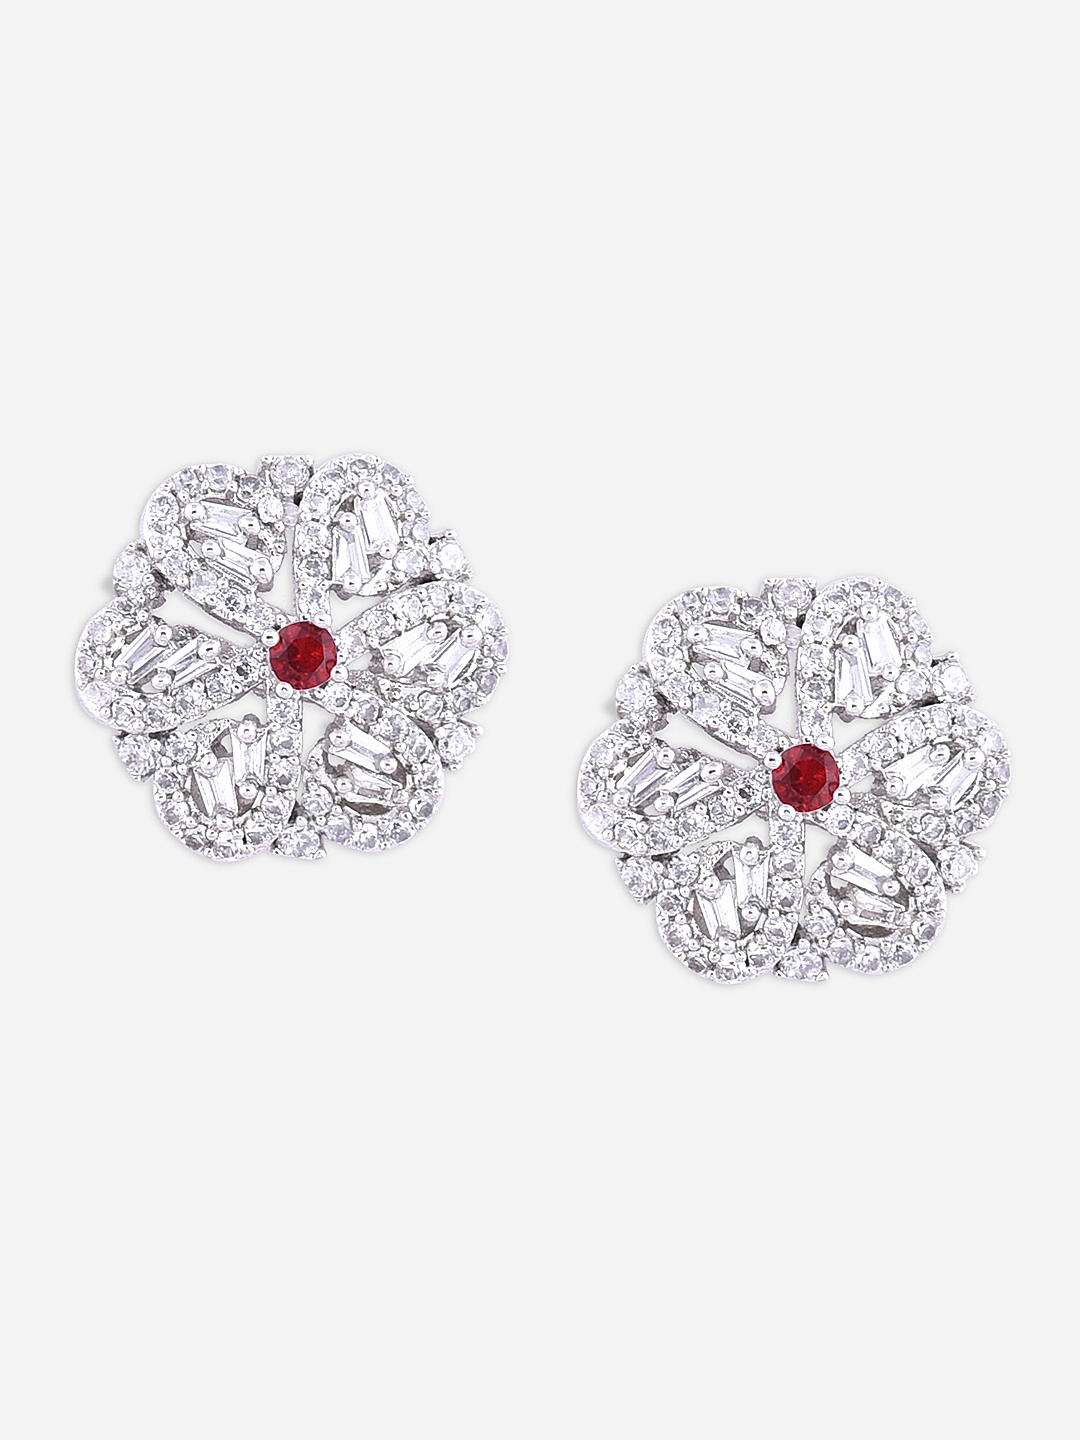 Buy 18k Yellow Gold and American Diamond Stud Earrings for Women VE-836  Online from Vaibhav Jewellers